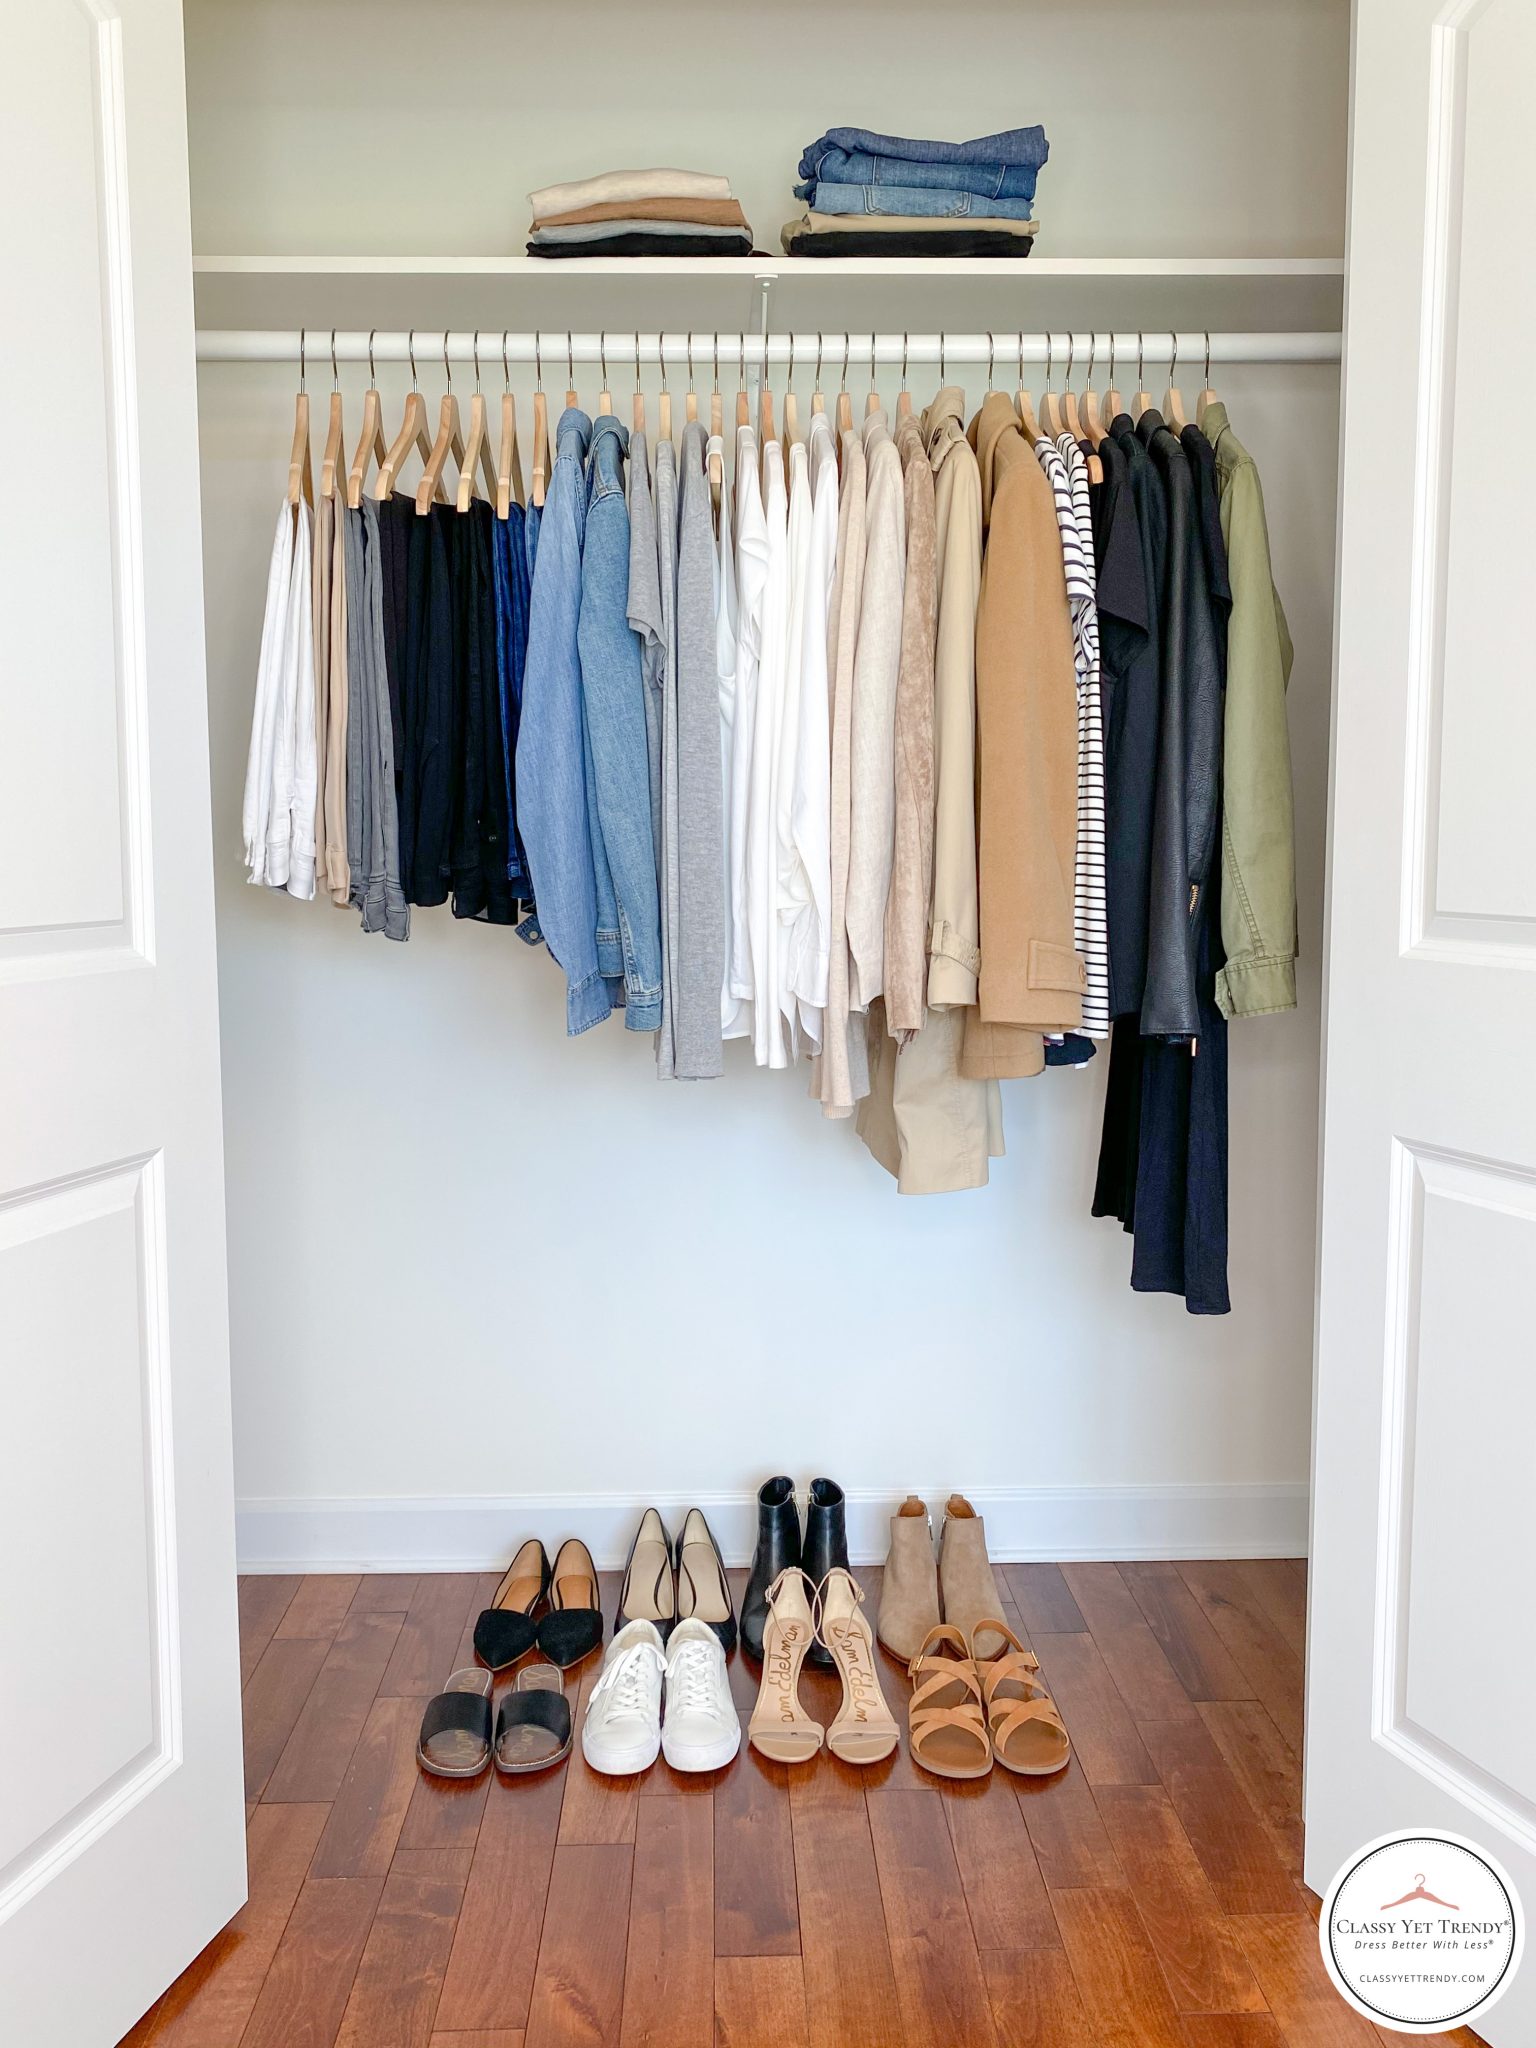 Wardrobe Styling Services: Classy Yet Trendy's Capsule Wardrobes vs.  Subscription Services vs. a Personal Stylist - Classy Yet Trendy